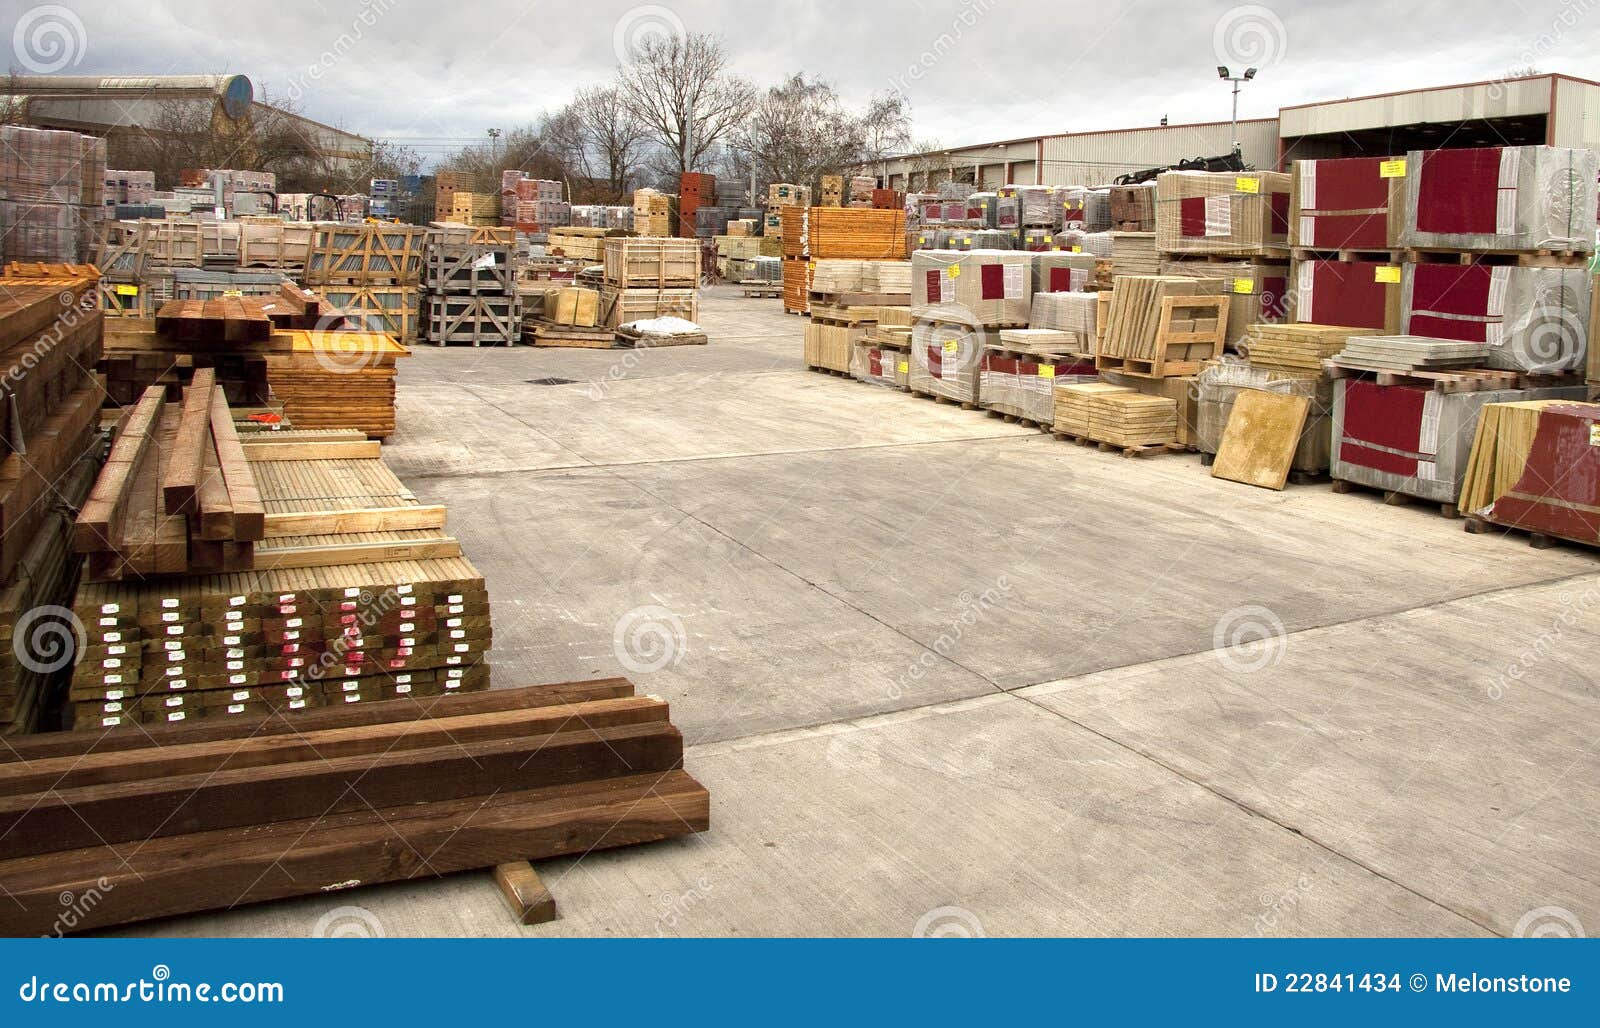 building and construction supplies